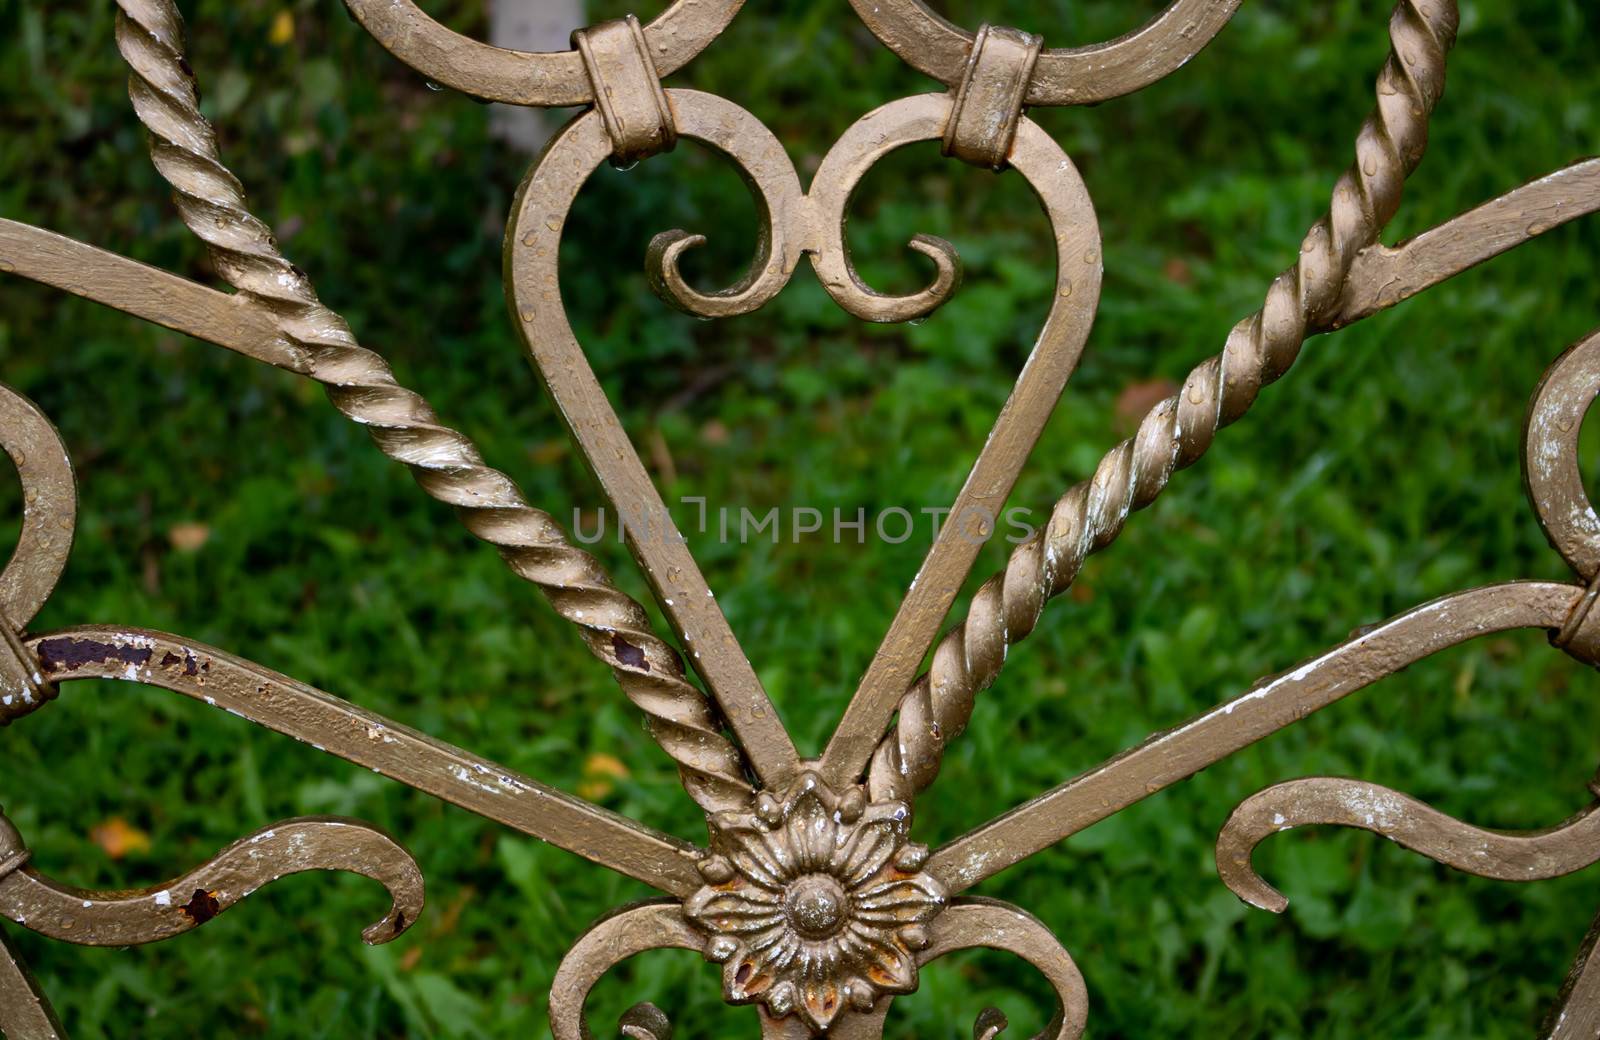 Forged elements on a garden bench in the shape of a heart.Garden wrought iron furniture in the garden by lapushka62